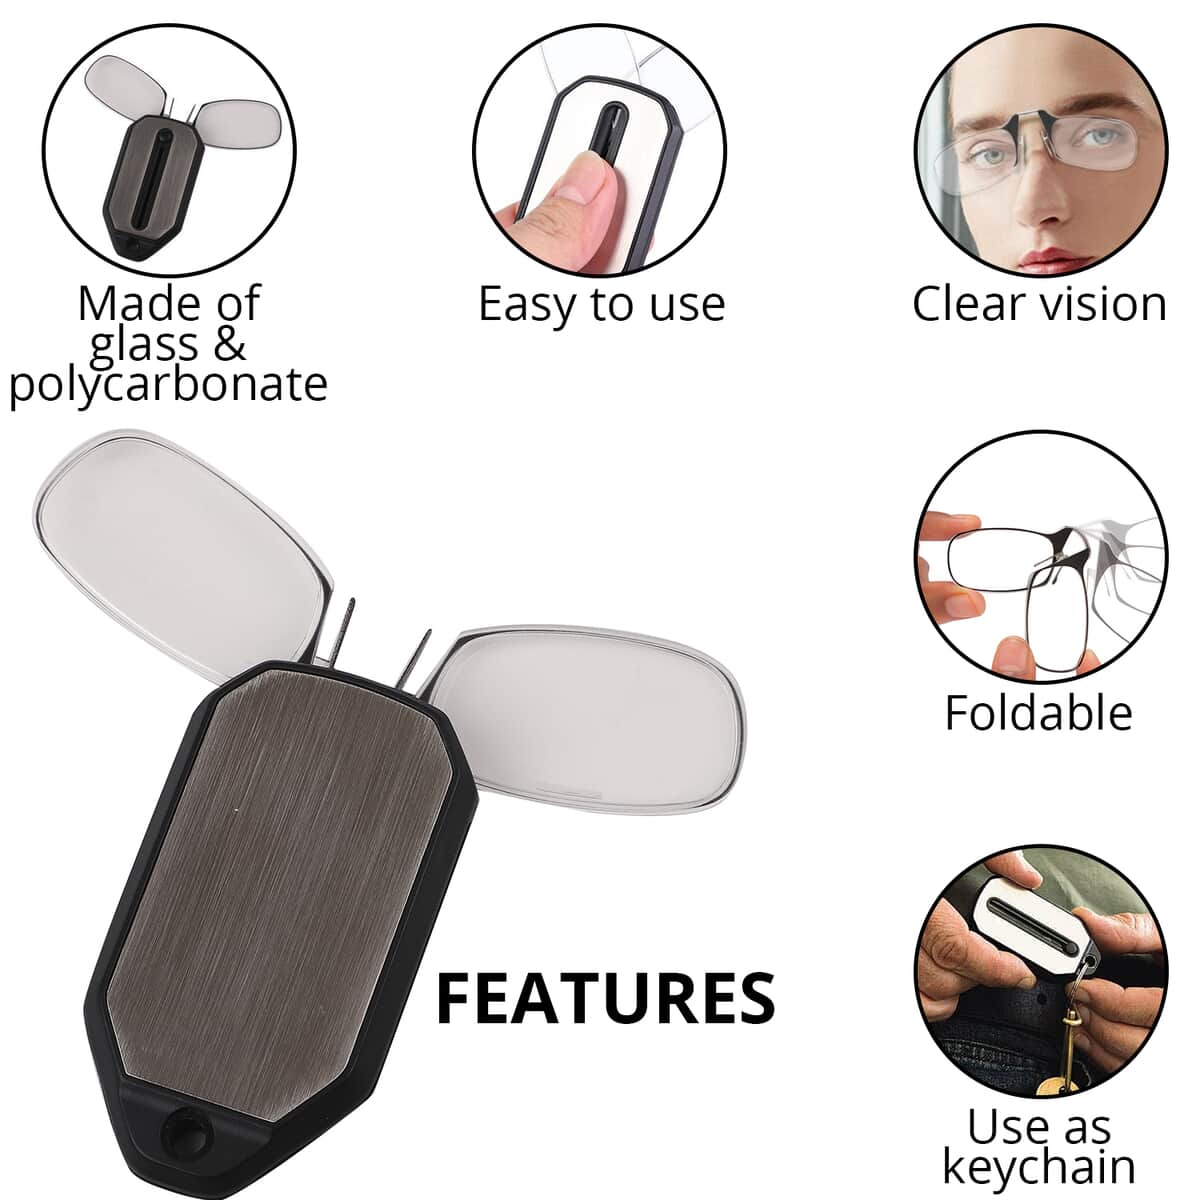 Black 200 Degree Foldable Reading Glasses with Case image number 2